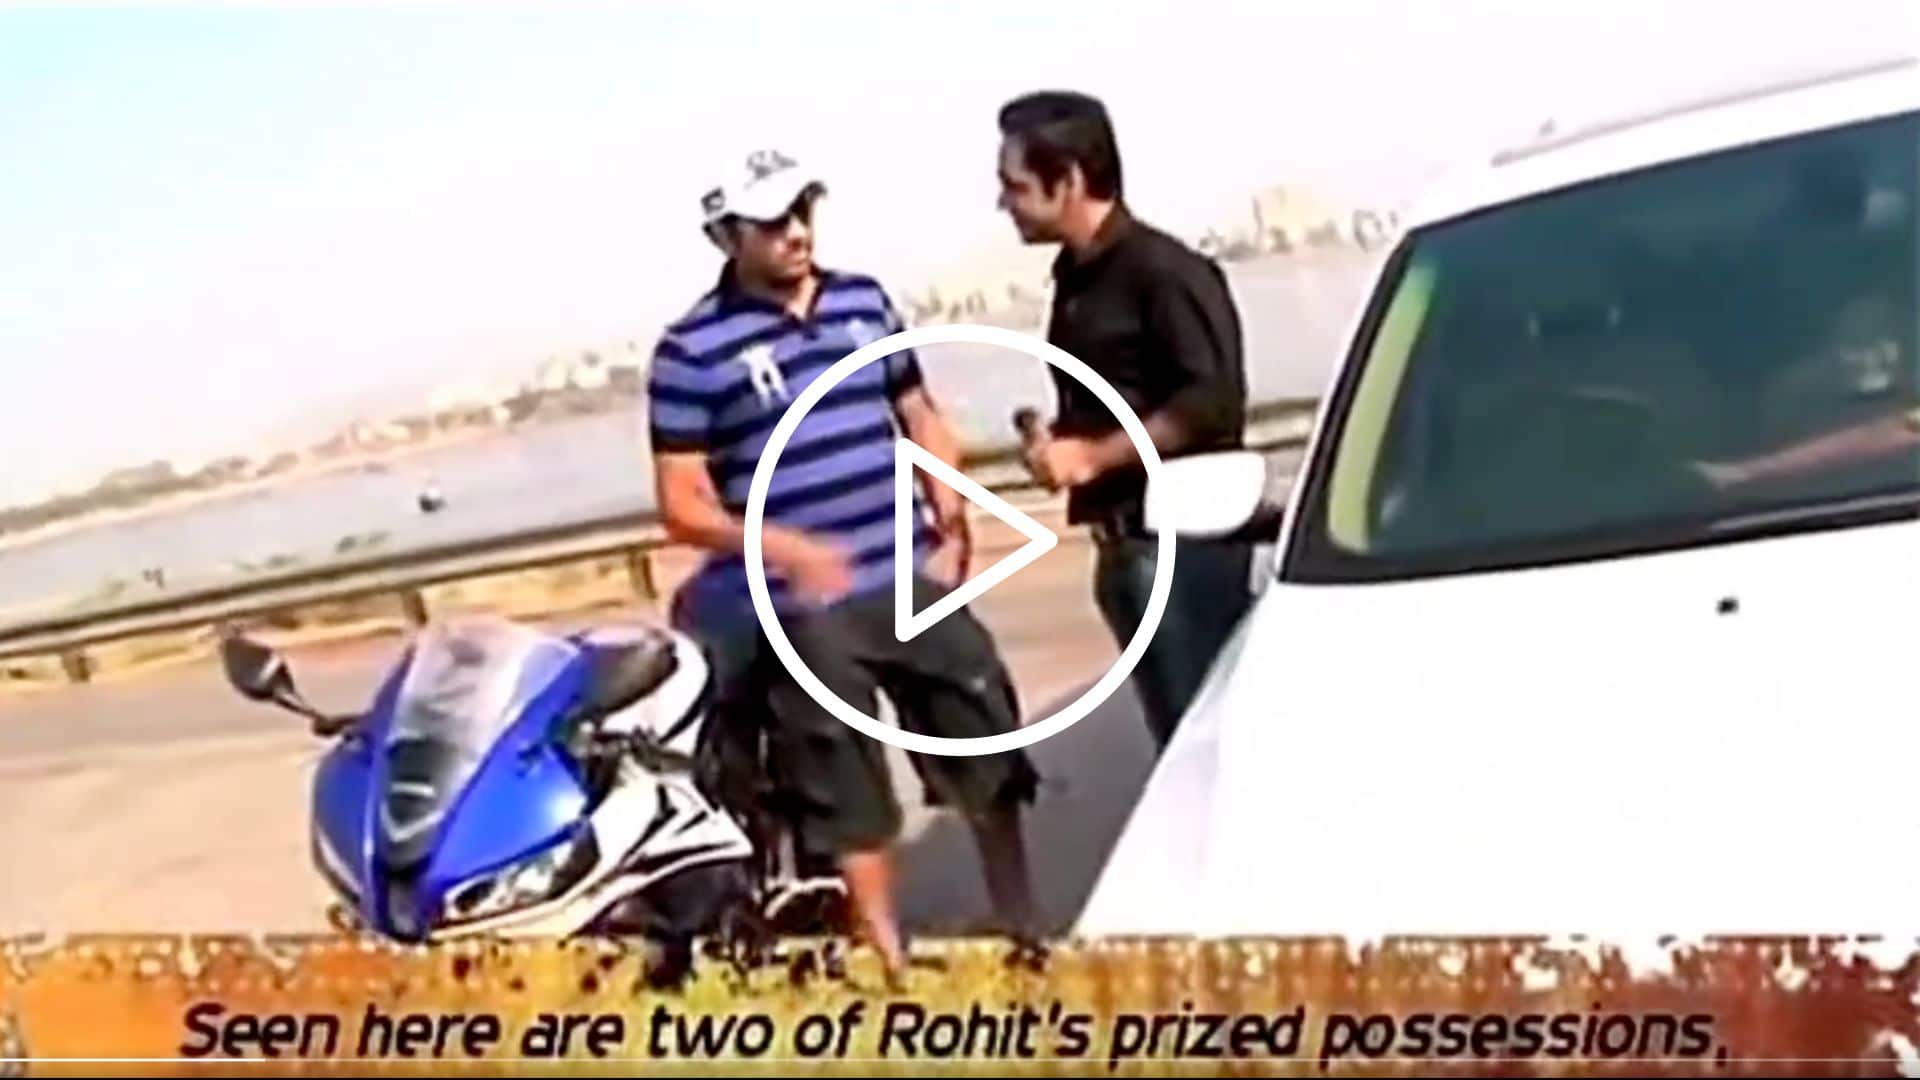 [Watch] When Rohit Admitted Love For Driving At 220 Kmph; Old Clip Gets Picked